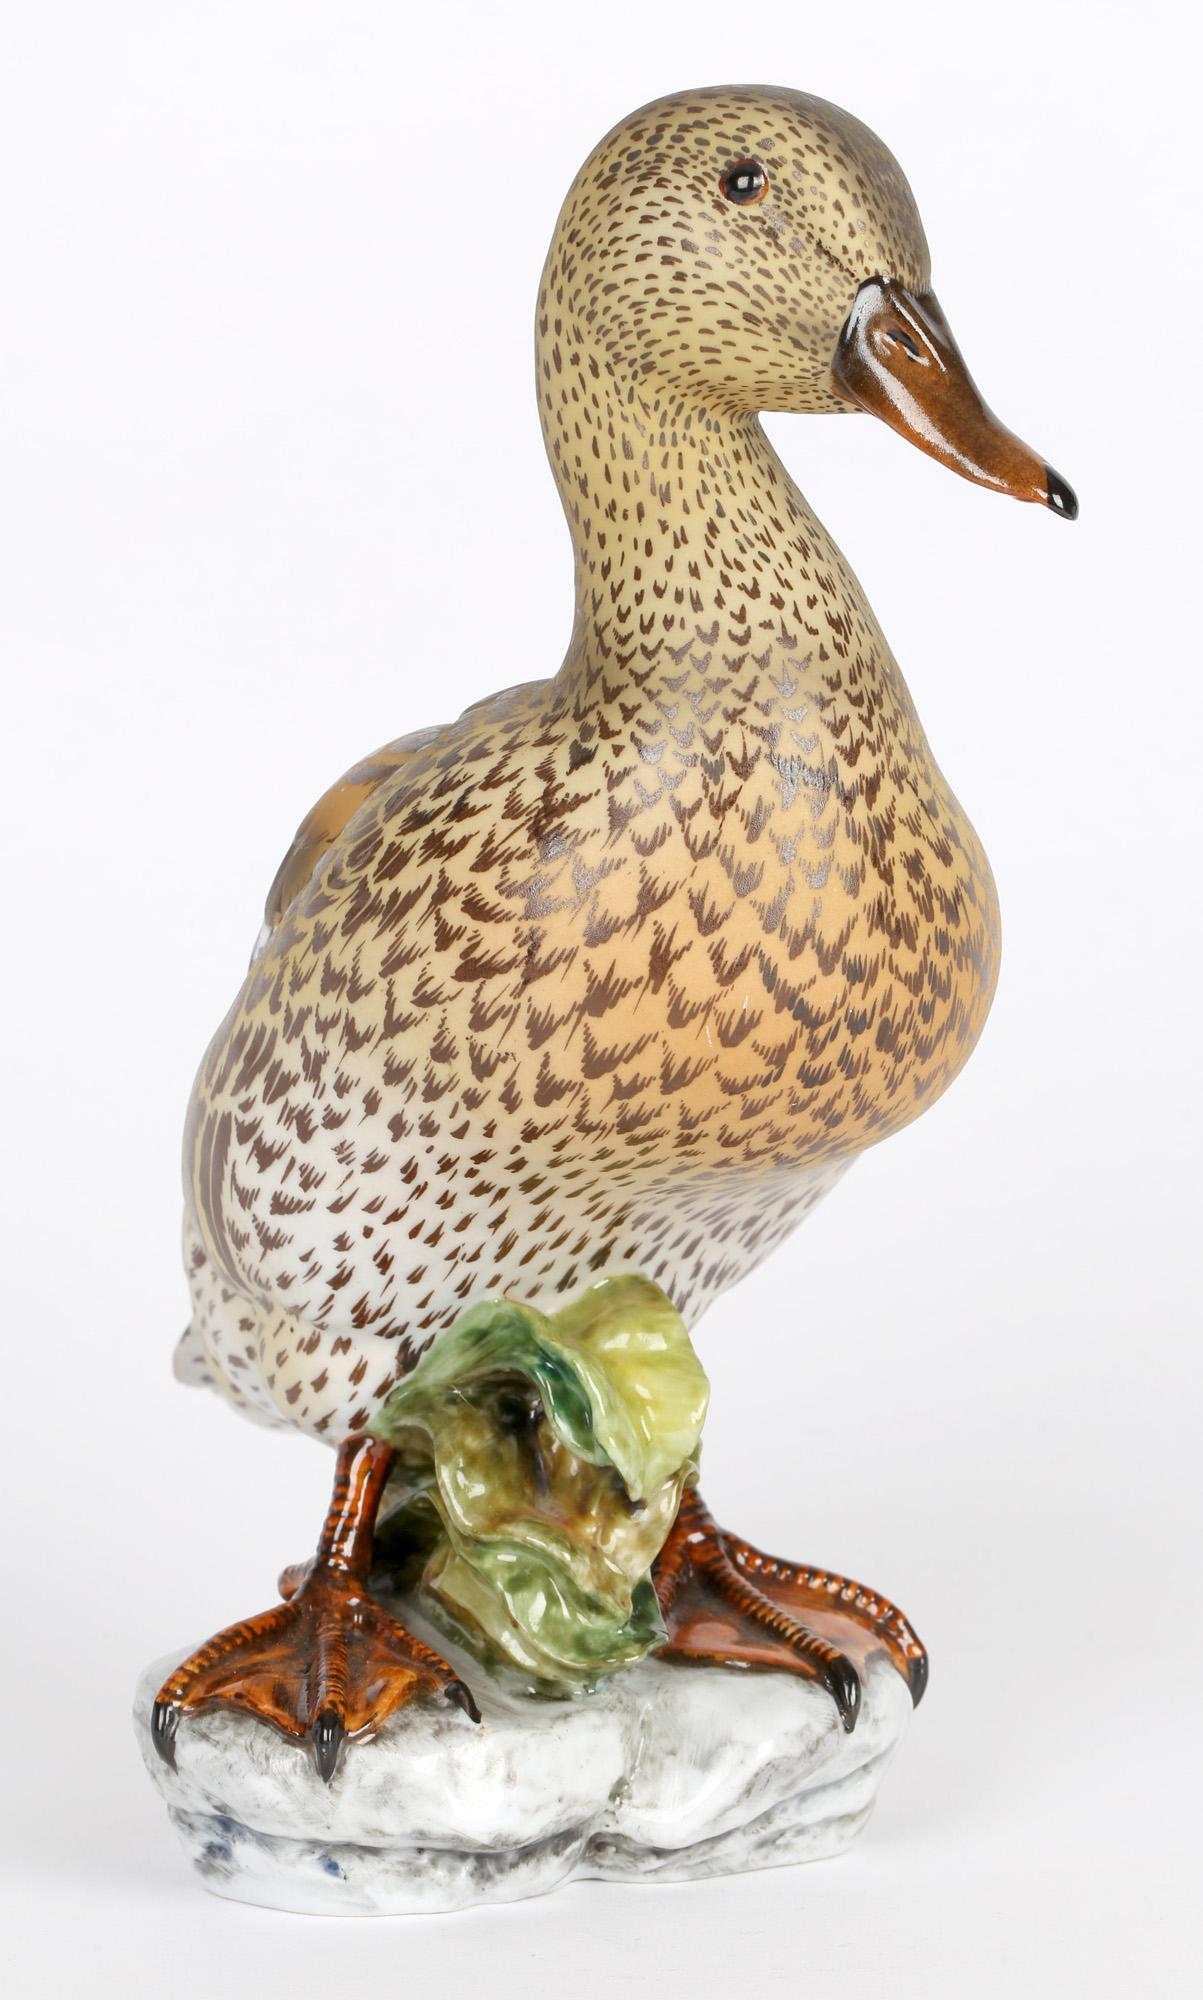 A very fine and naturalistic Spanish porcelain figure of duck signed C Martino and dating from the 20th century. The duck stands raised on a molded rock work base applied with green leafed shrub. The duck has wide open webbed feet naturalistically